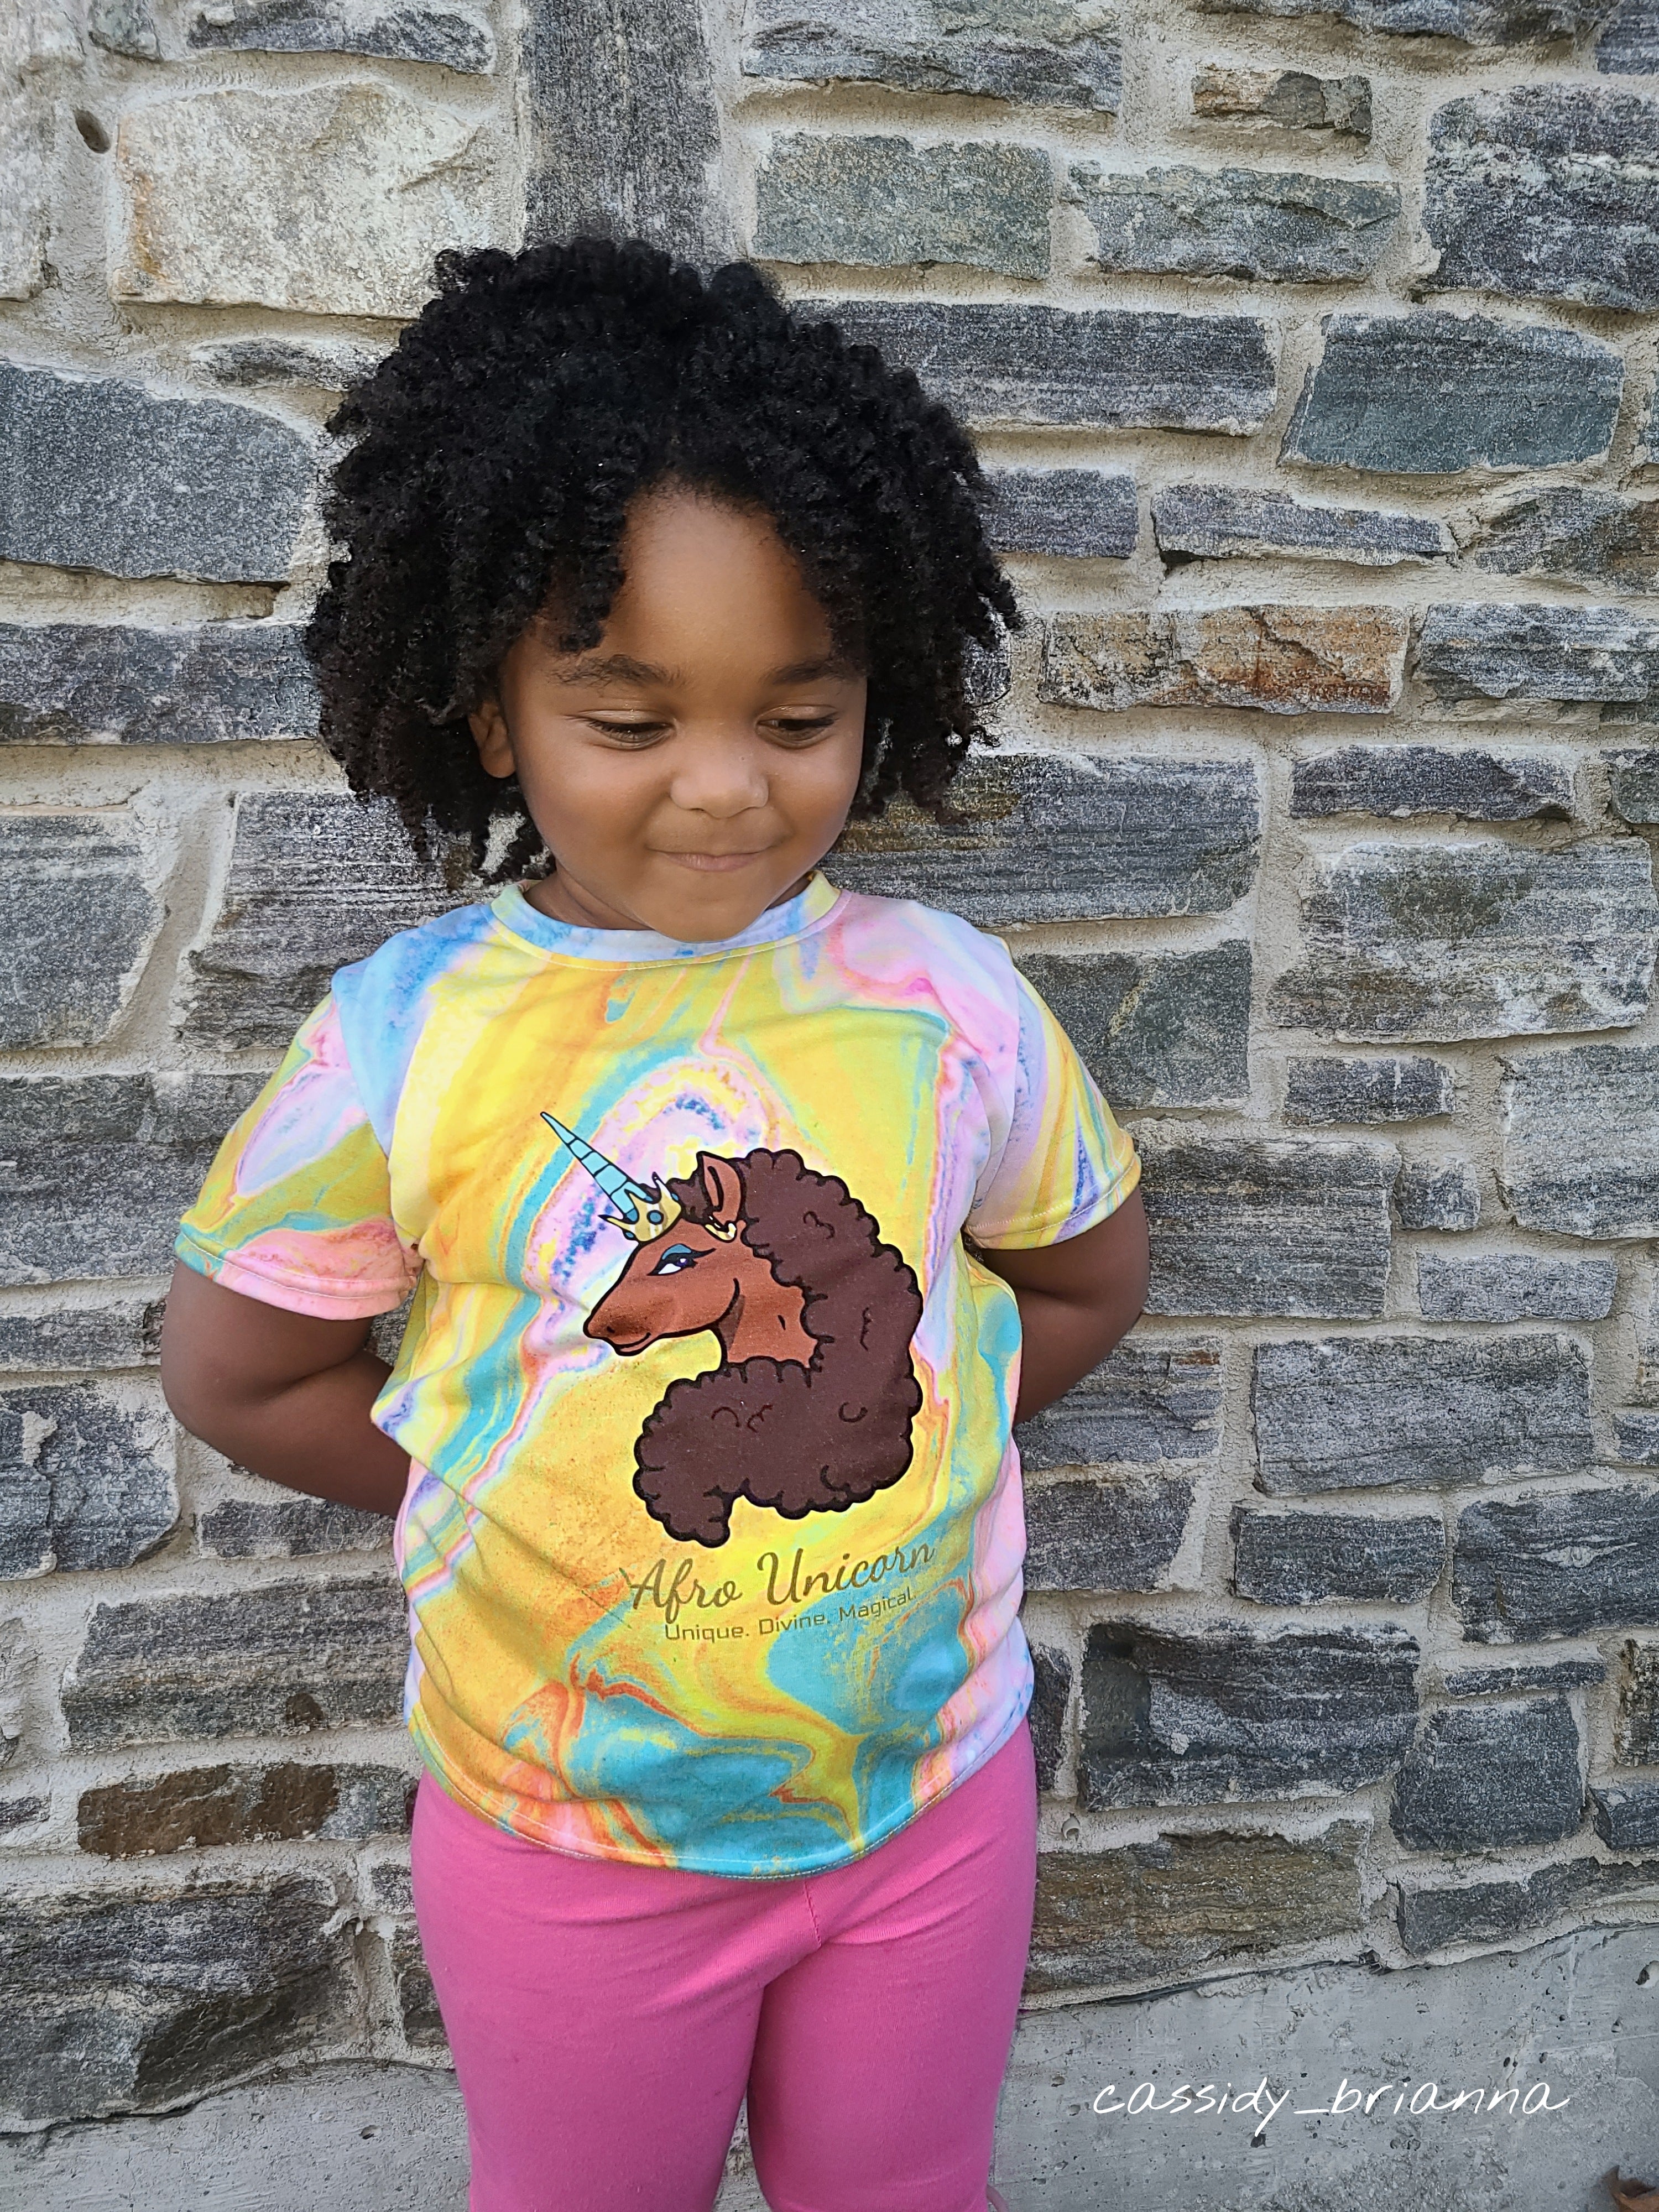 Limited Edition Tie Dye Afro Unicorn Youth Tee